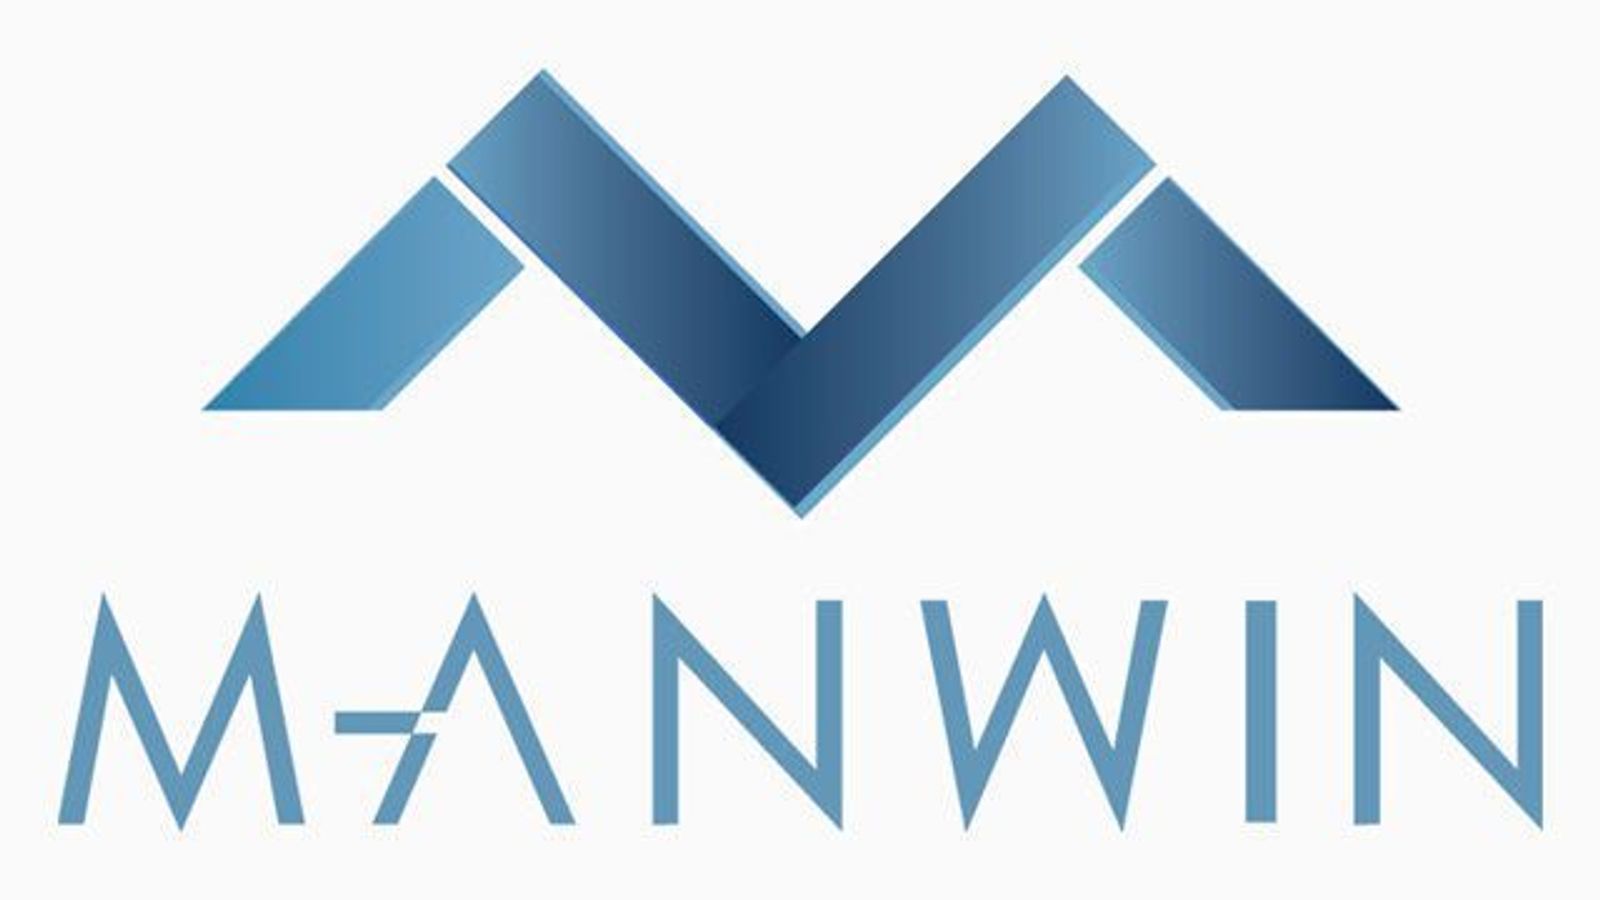 Manwin USA to Match Donations to No on Gov't Waste Campaign